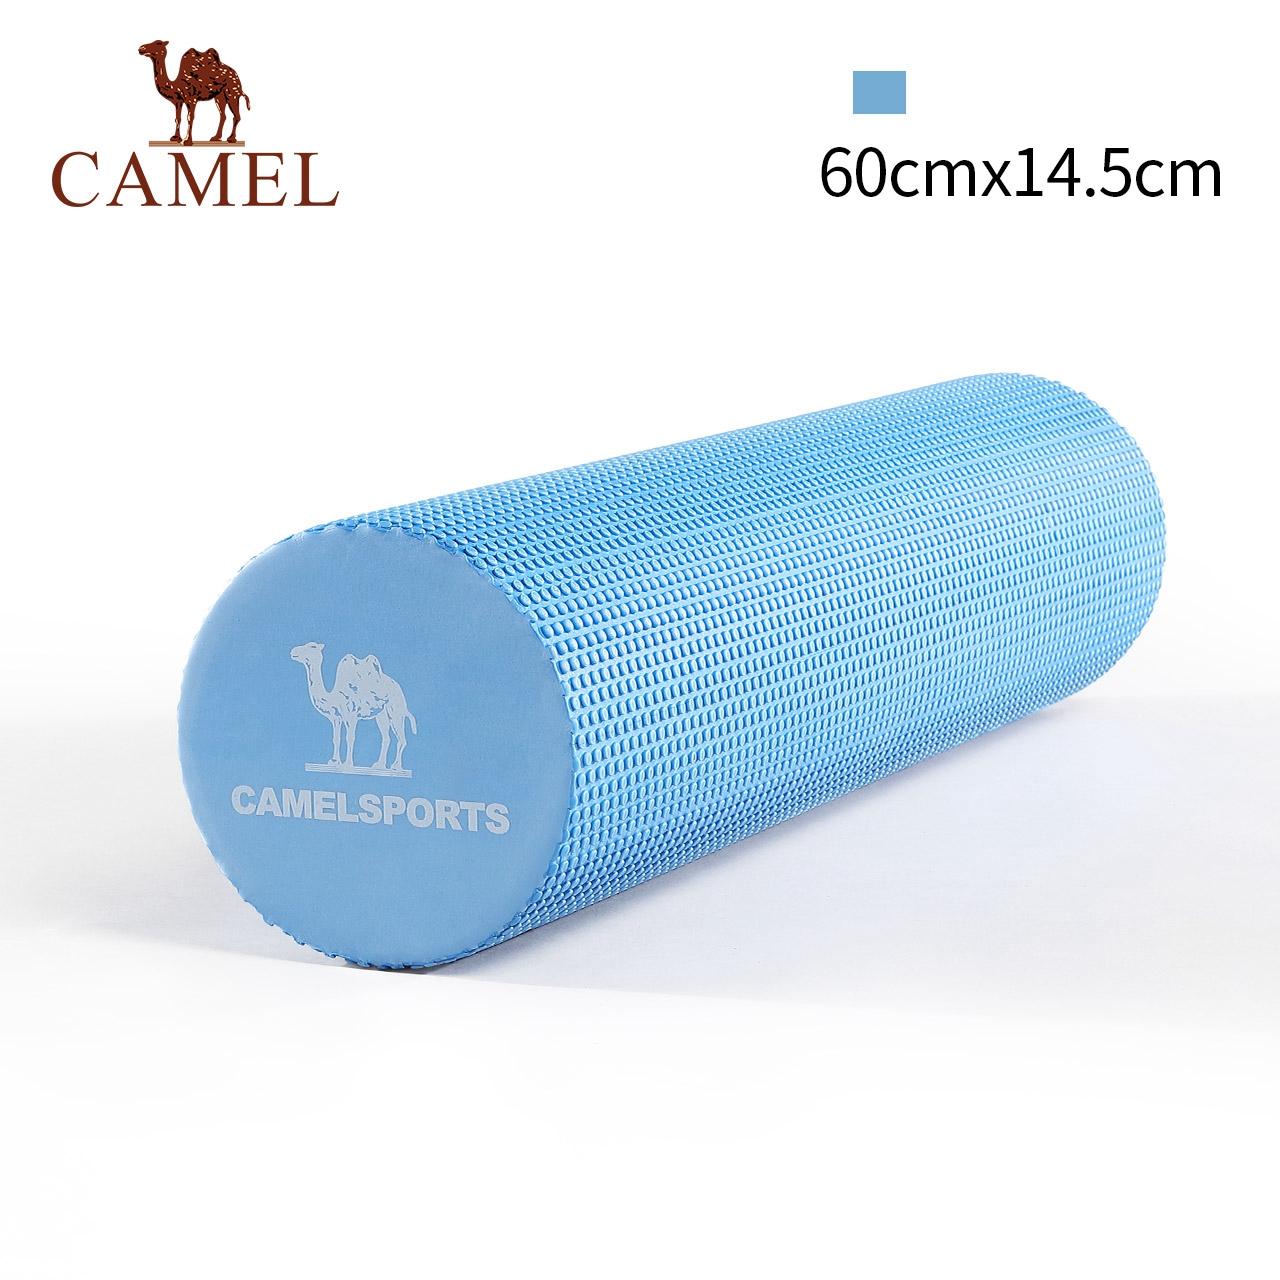 CAMEL Yoga Column Exercise Muscle Relaxation Roller Foam Roller Fitness Yoga Massage Shaft solid